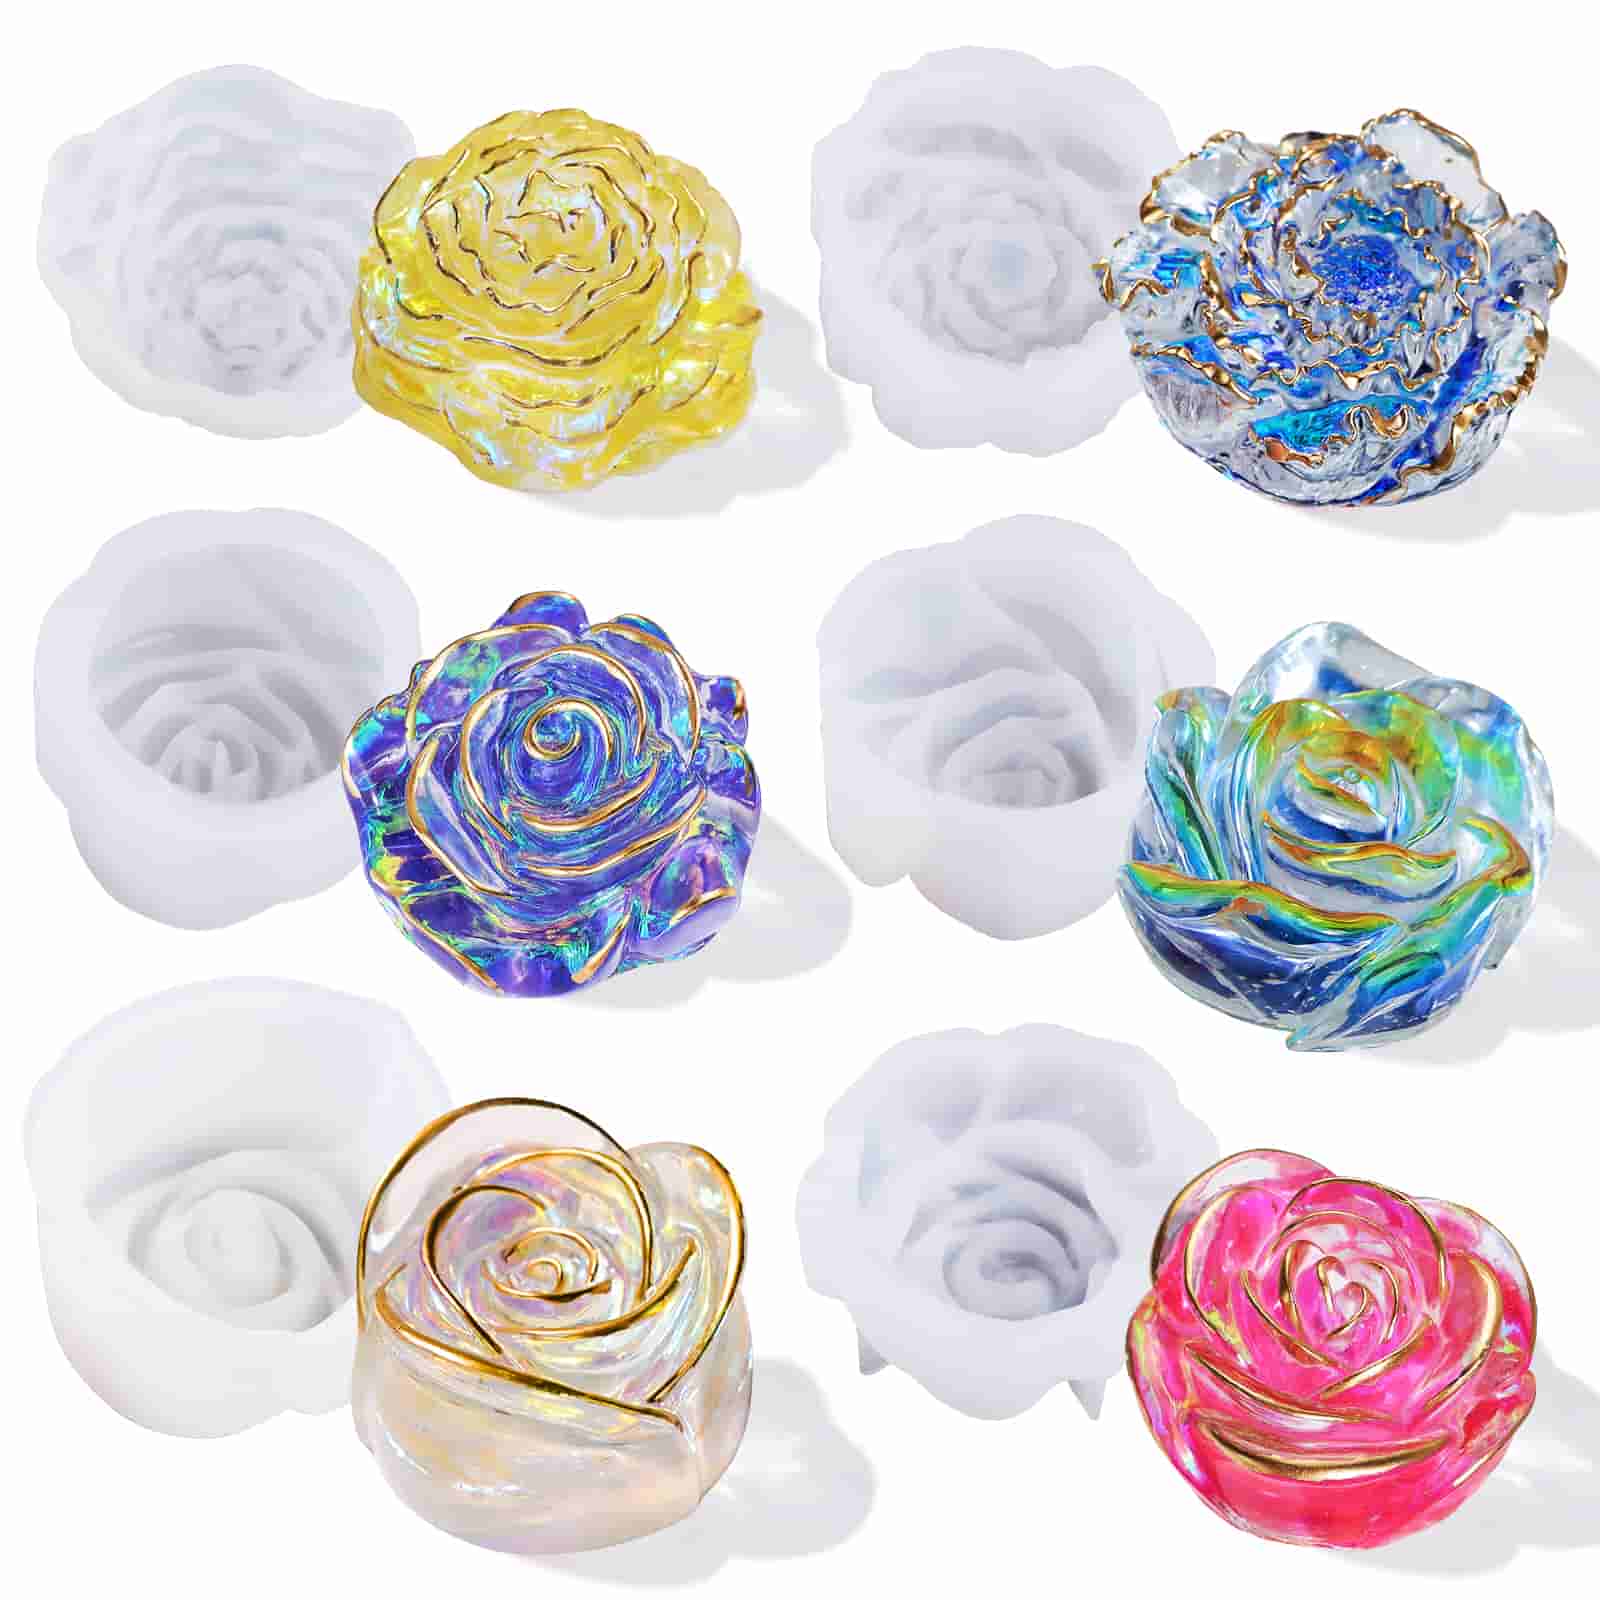 Rose Flower Candle Molds - 6 Pcs – Let's Resin